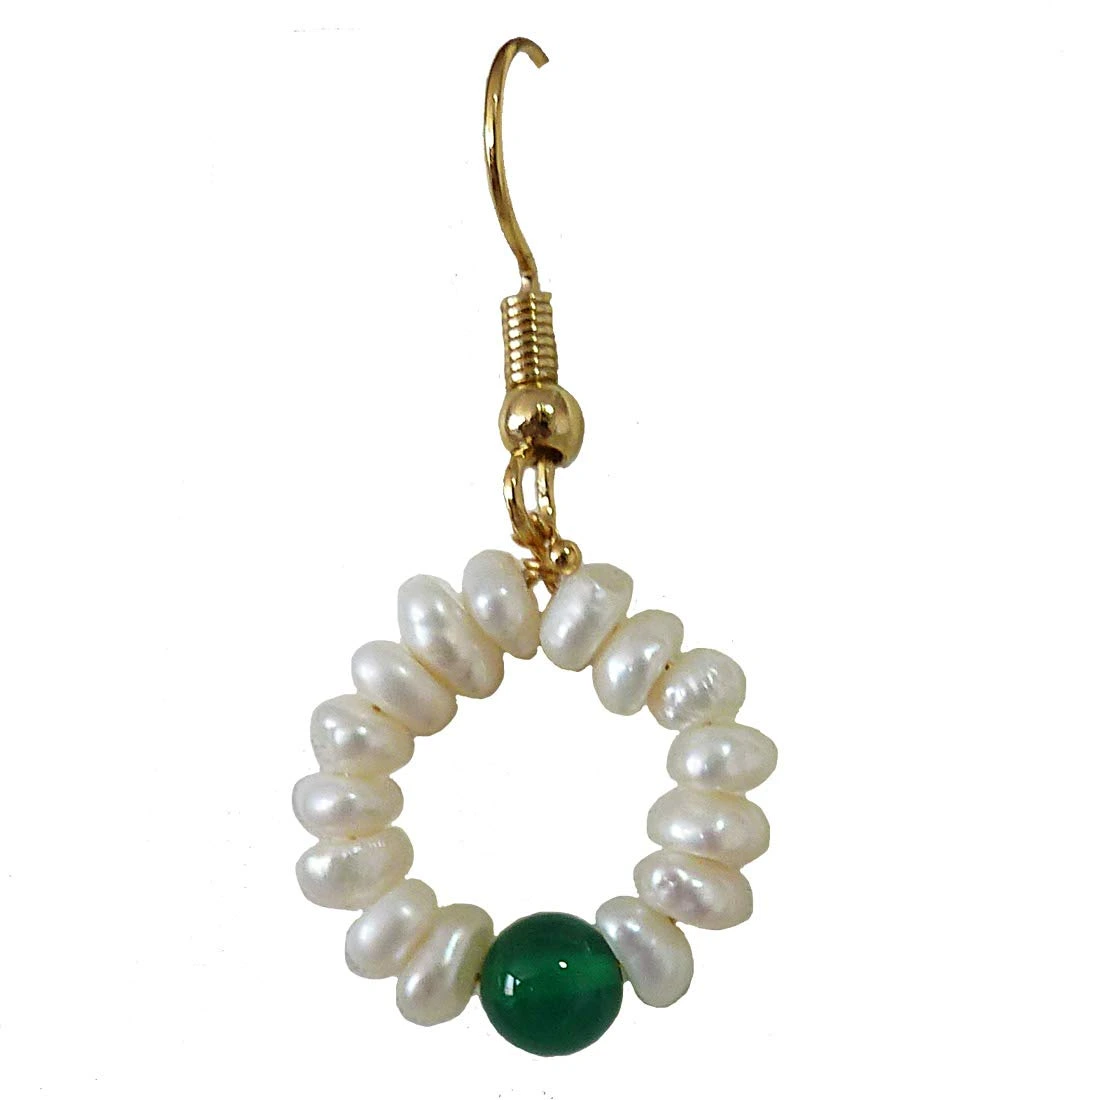 Dangling Circular Green Onyx Beads, Freshwater Pearl and Gold Plated Wire Style Earrings(SE384)